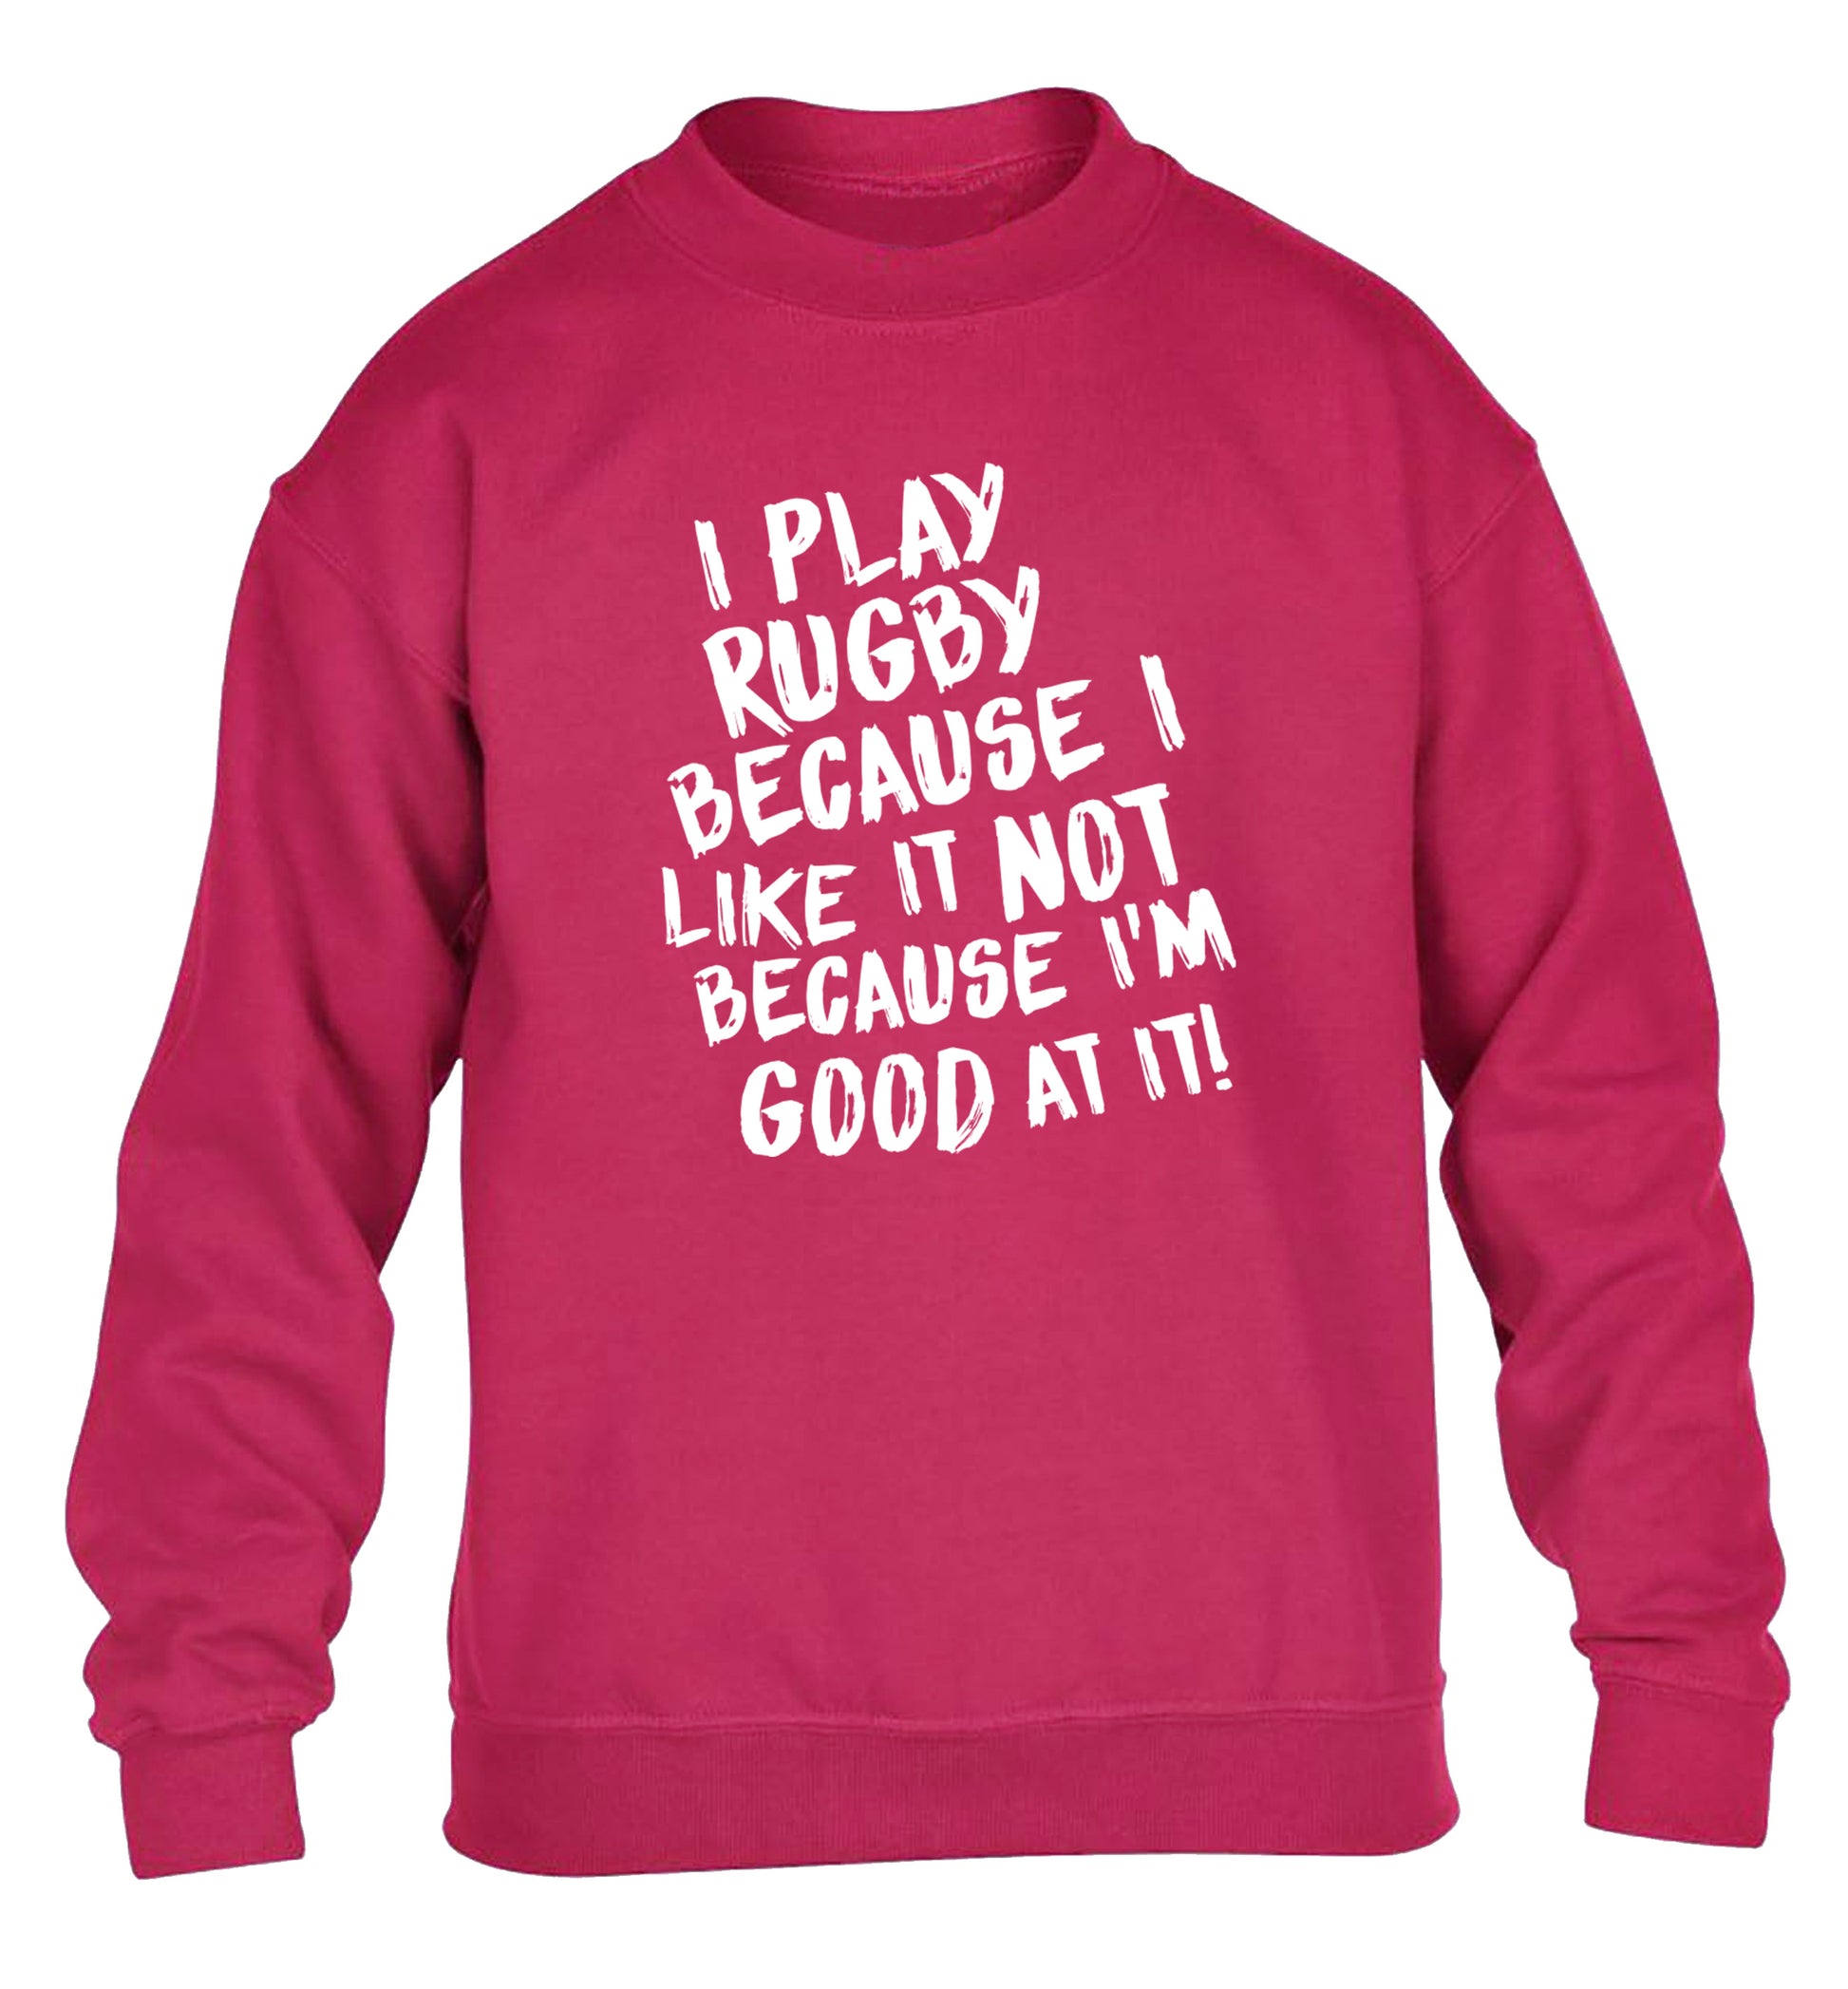 I play rugby because I like it not because I'm good at it children's pink sweater 12-13 Years